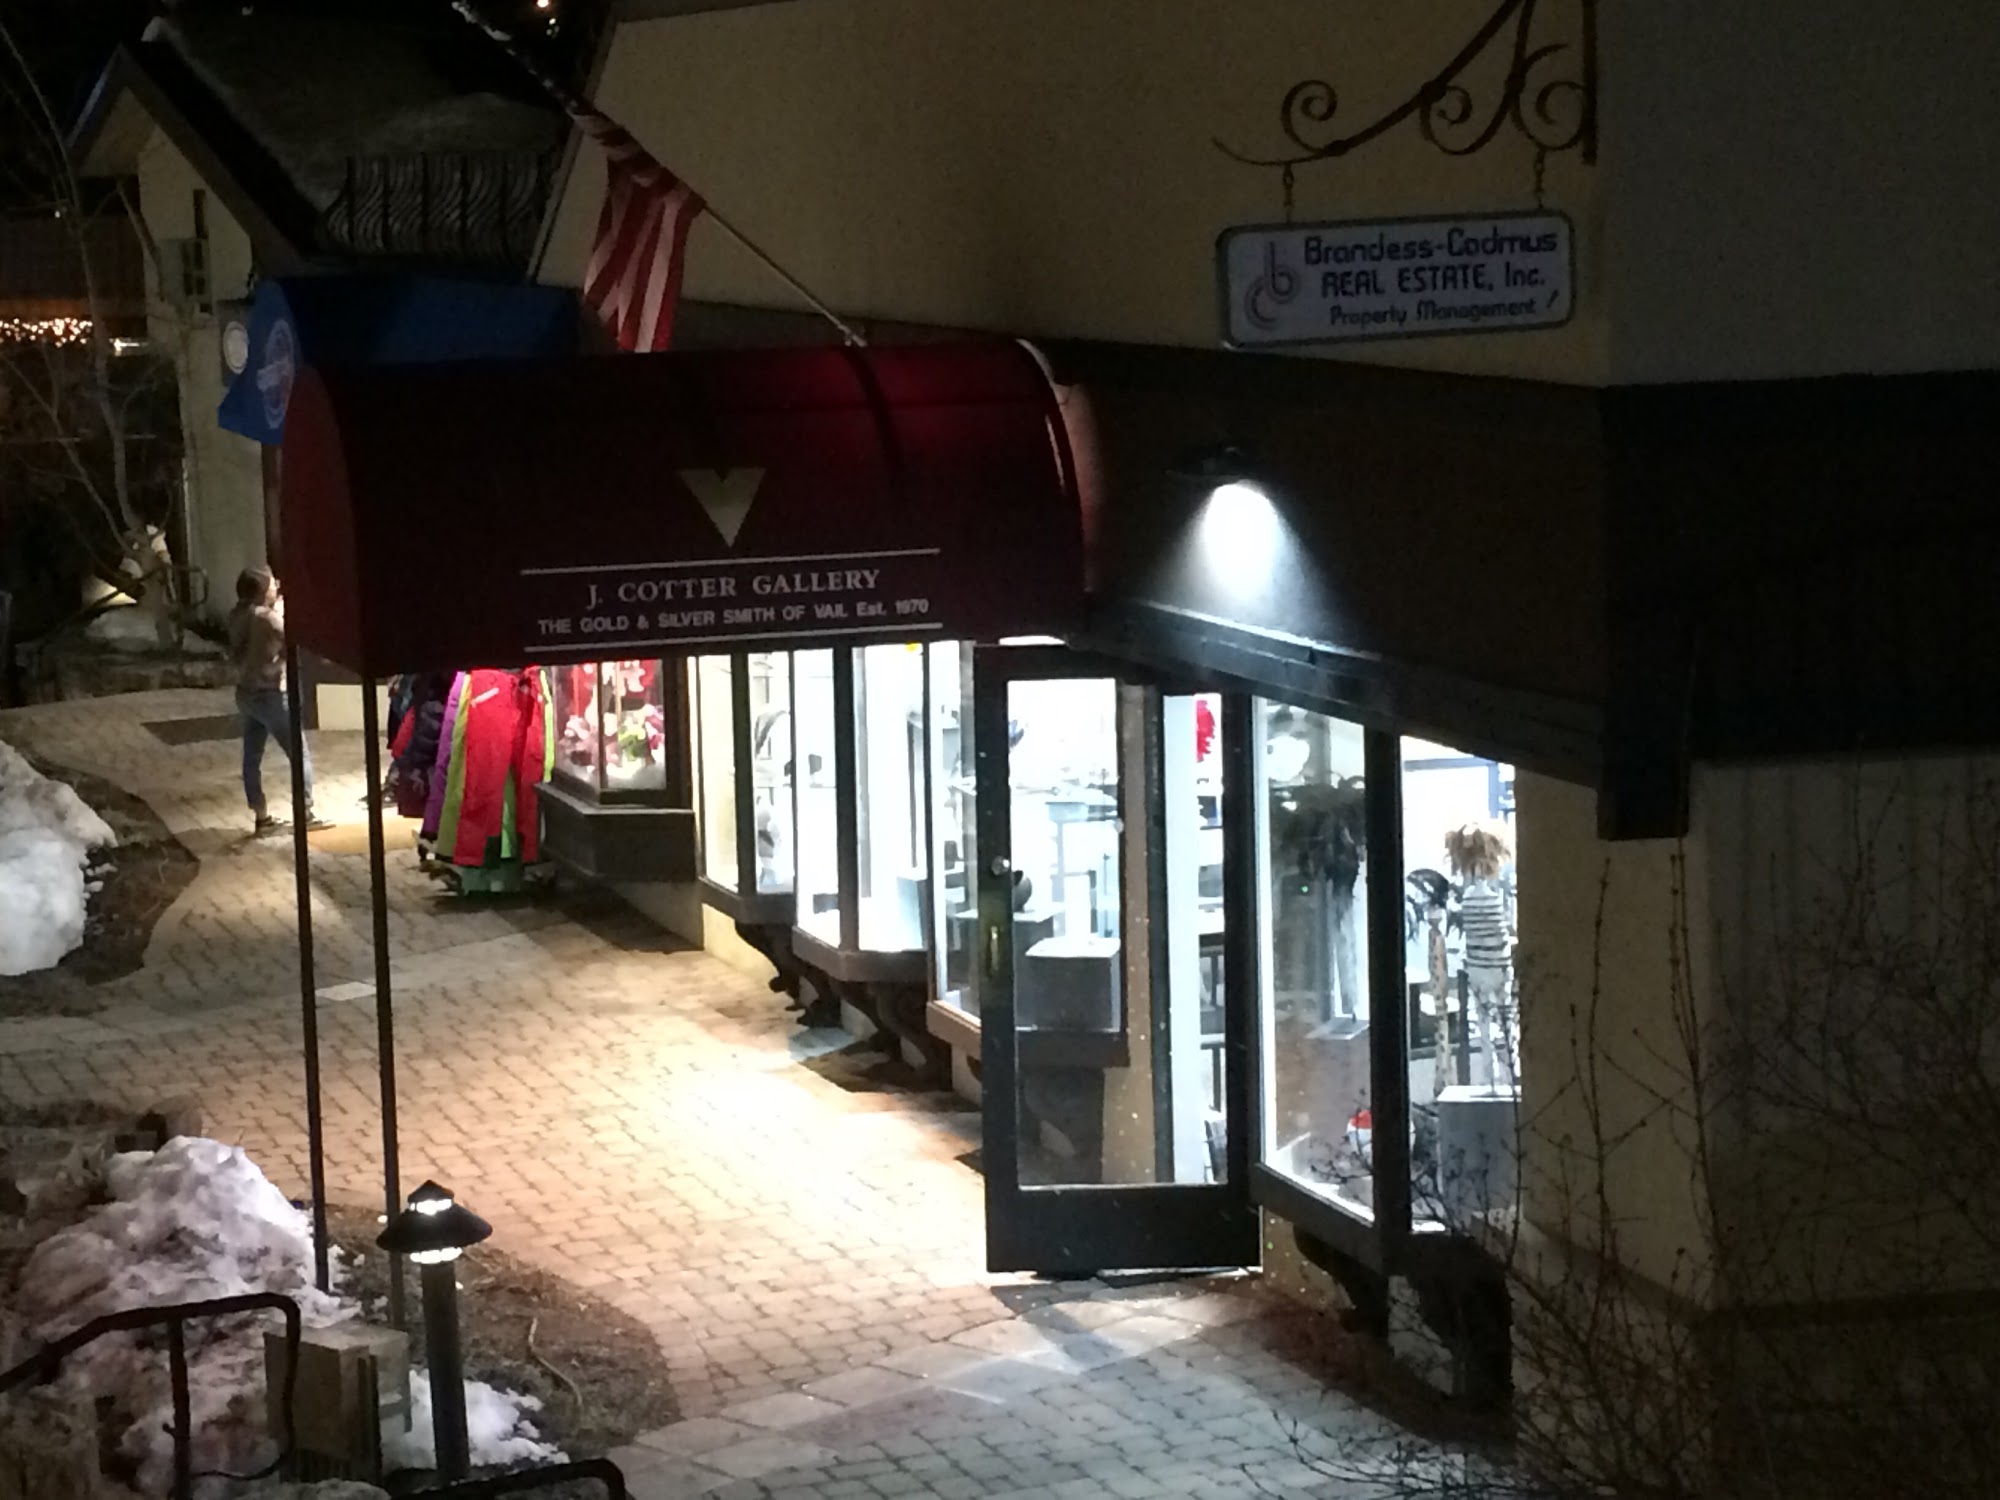 J. Cotter Gallery - The Gold and Silversmith of Vail